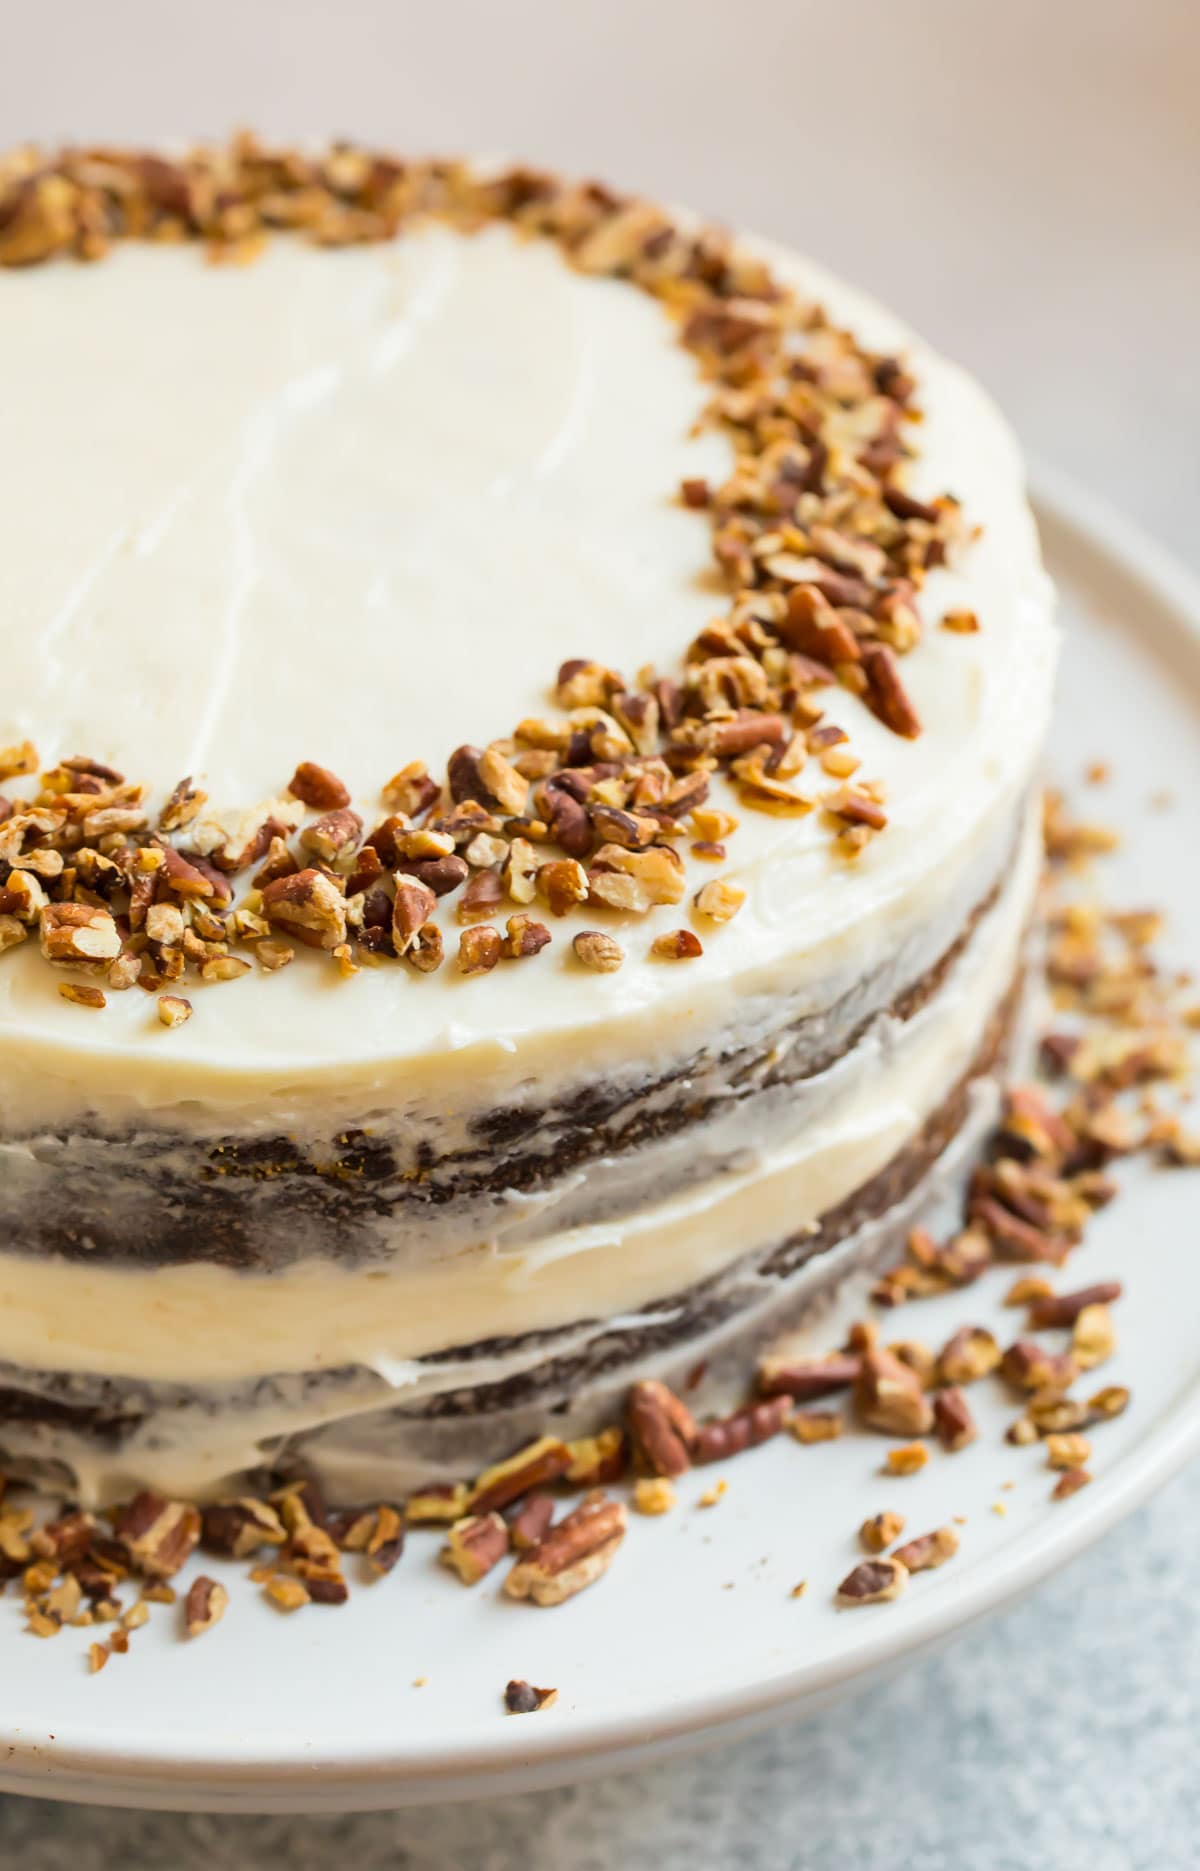 A beautifully decorated almond flour gluten free carrot cake topped with nuts